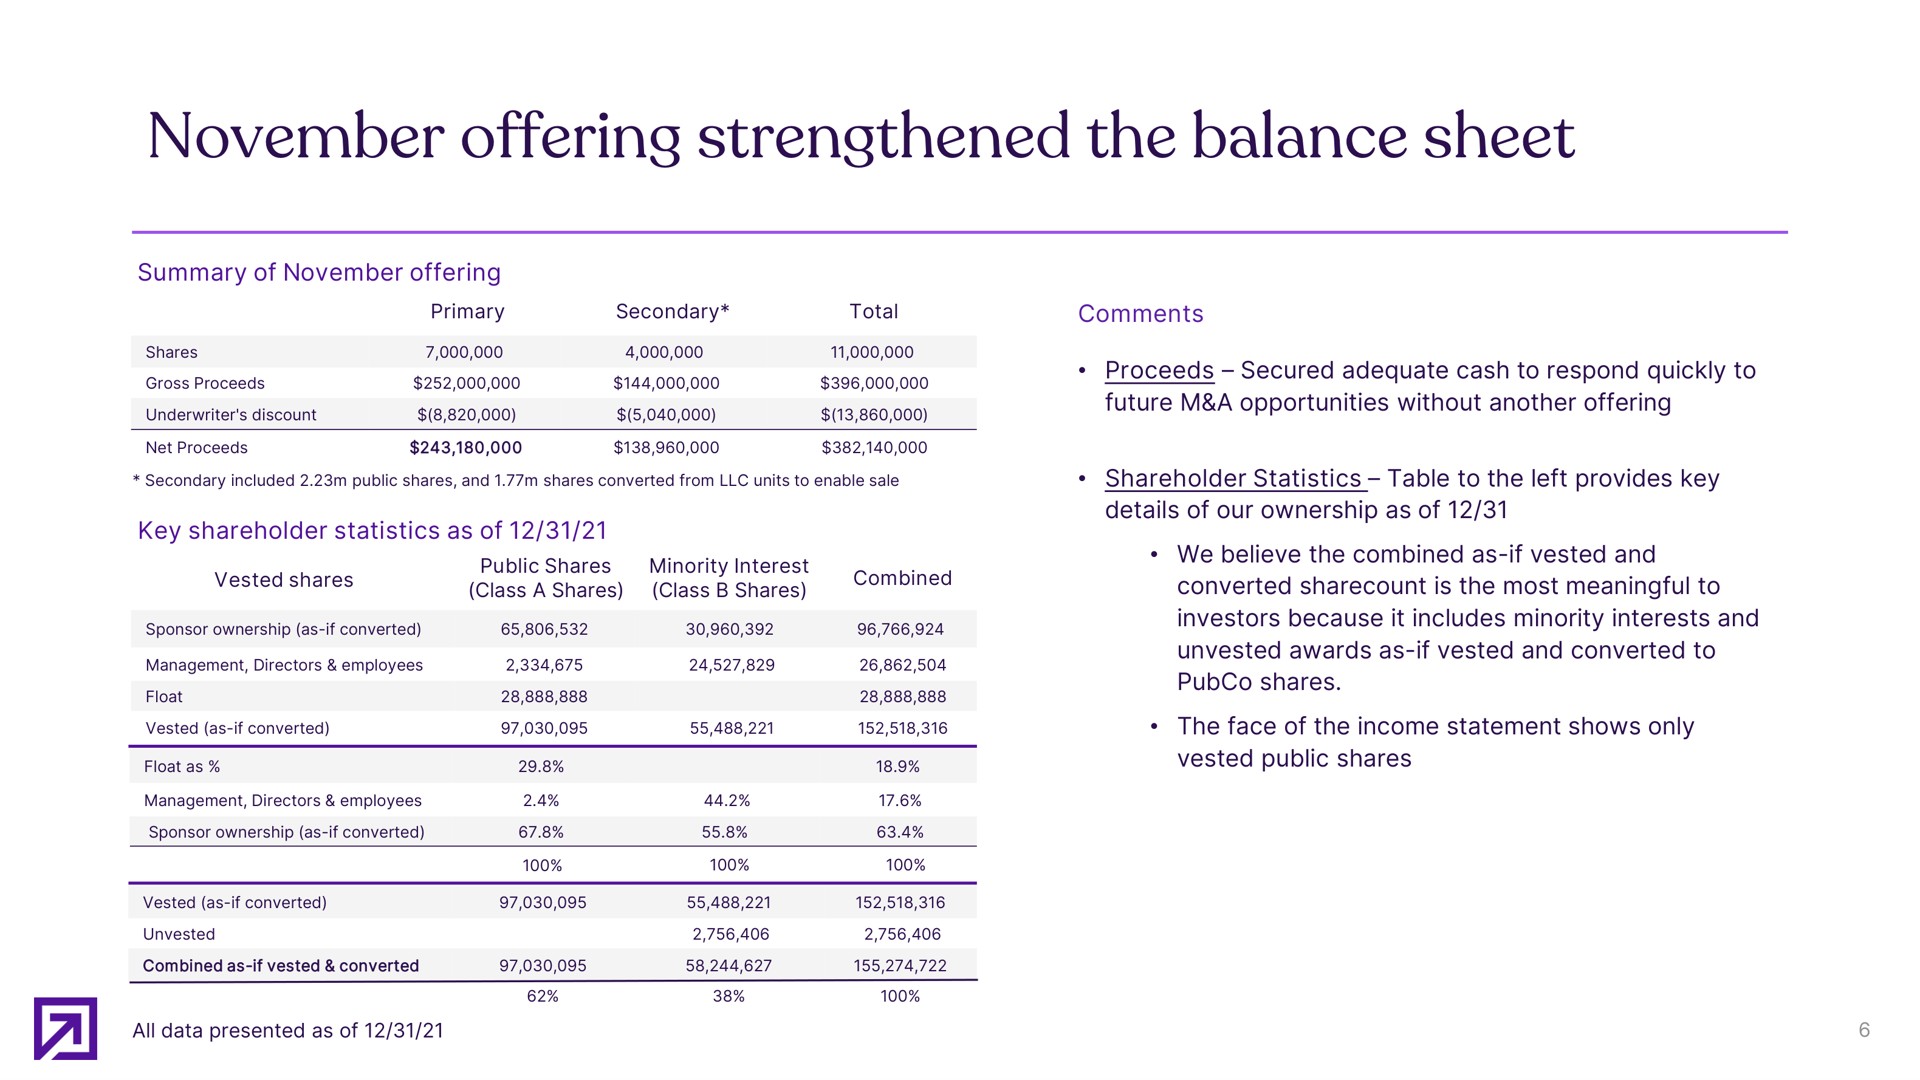 offering strengthened the balance sheet | Definitive Healthcare